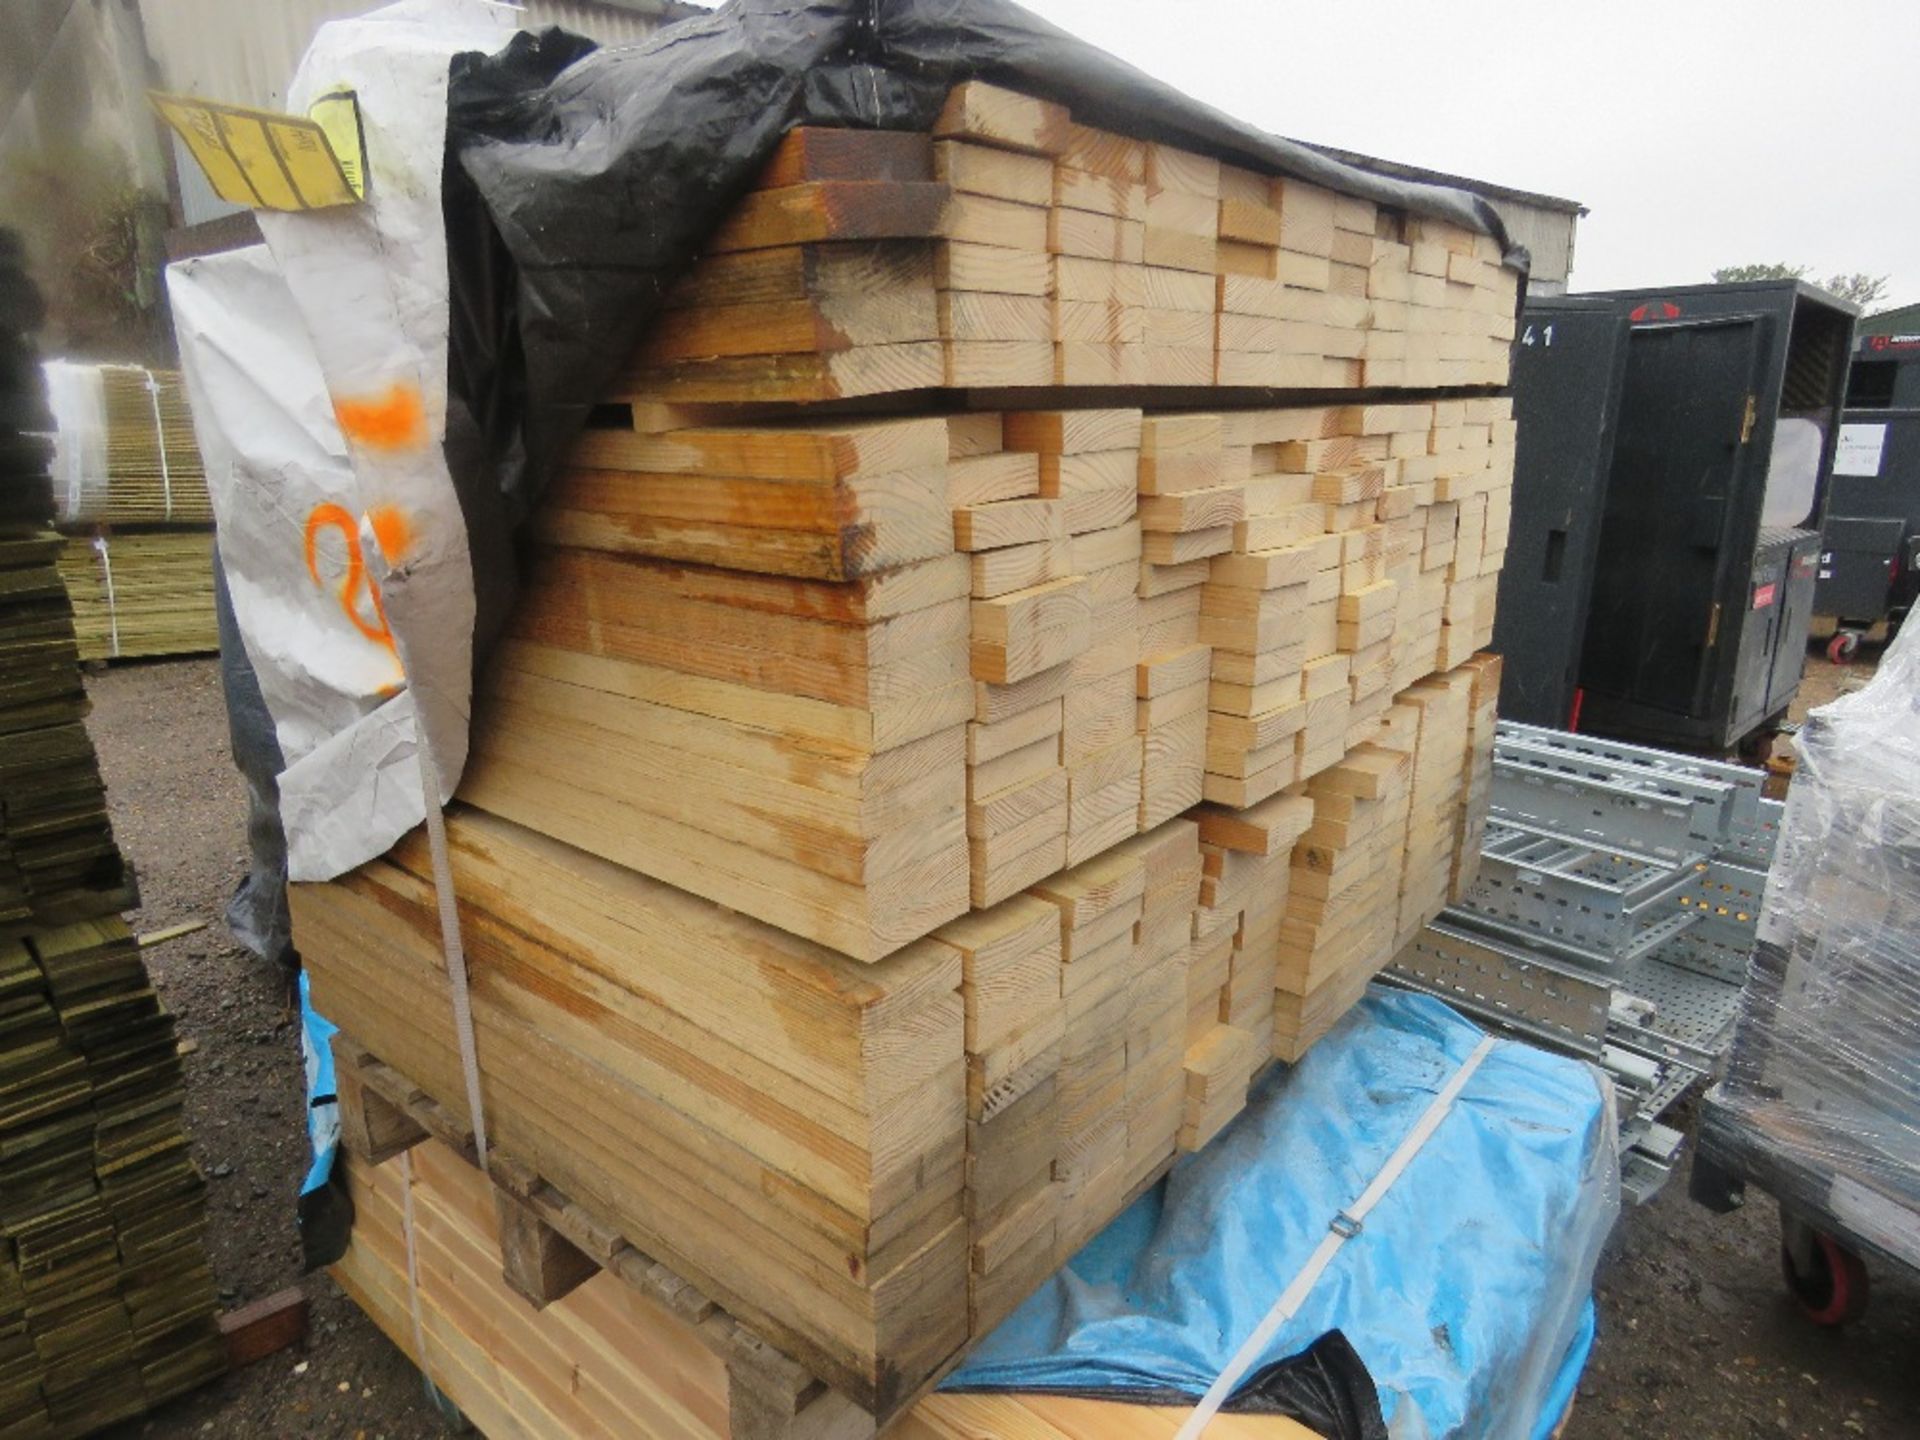 PACK OF UNTREATED TIMBER BOARDS 95CM X 105MM X 25MM APPROX.